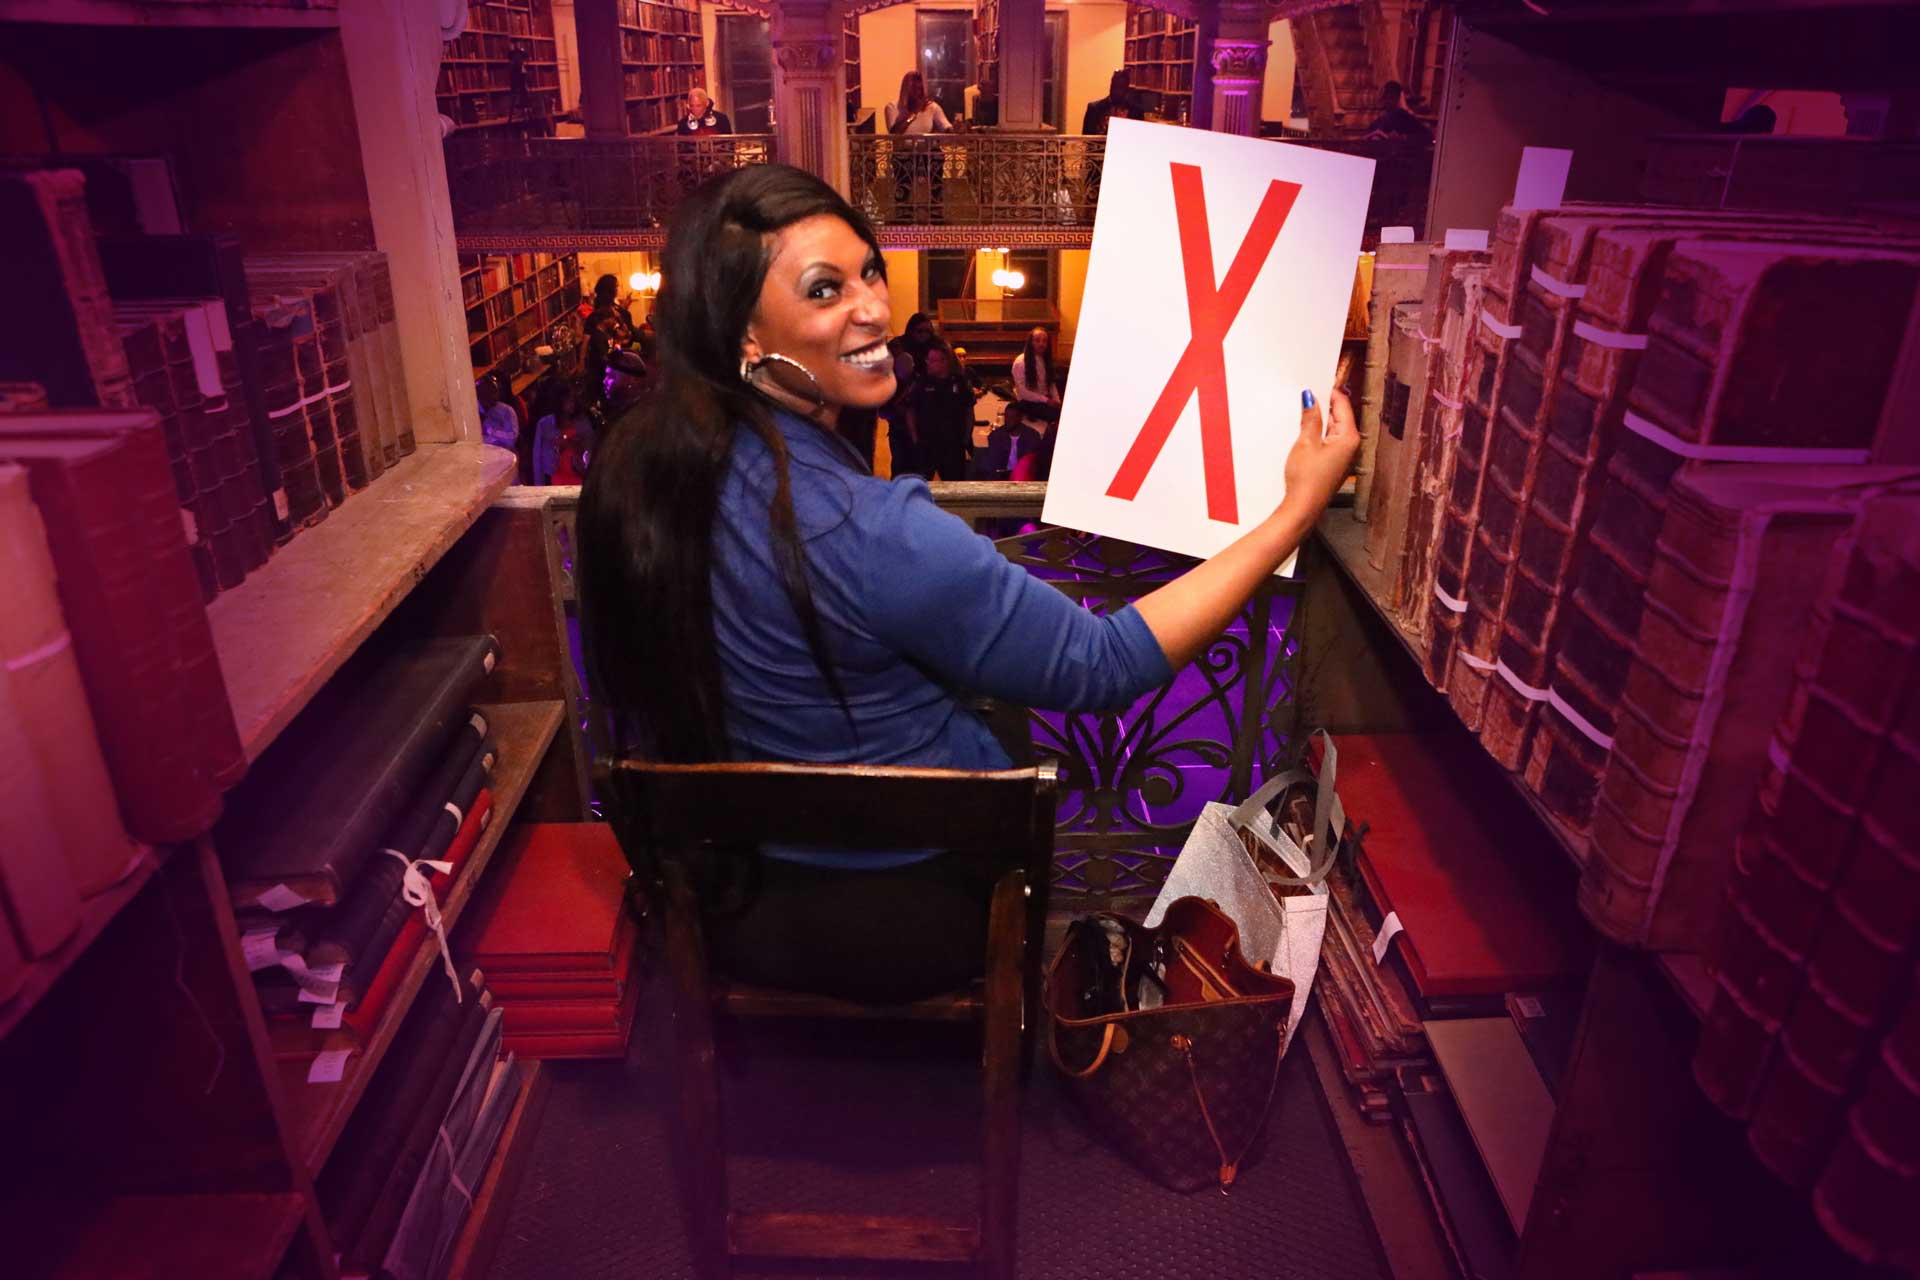 A person in between books holding an "X" poster